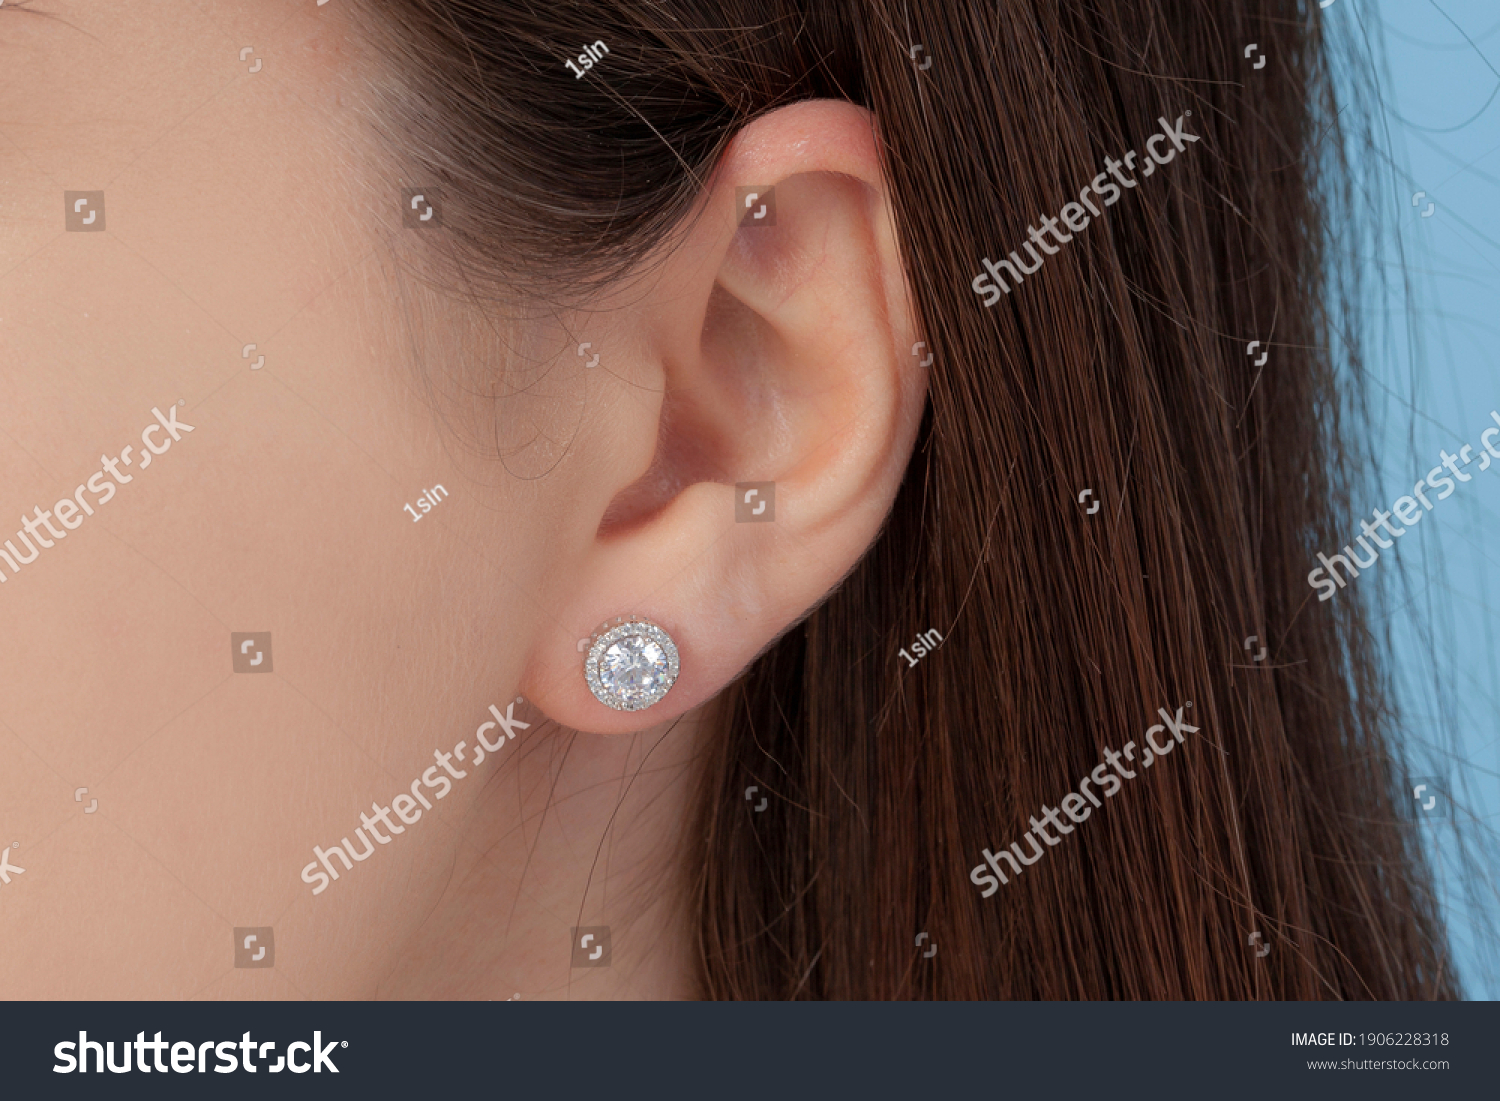 Round silver earrings on the ear of a well-groomed lady on a blue background #1906228318